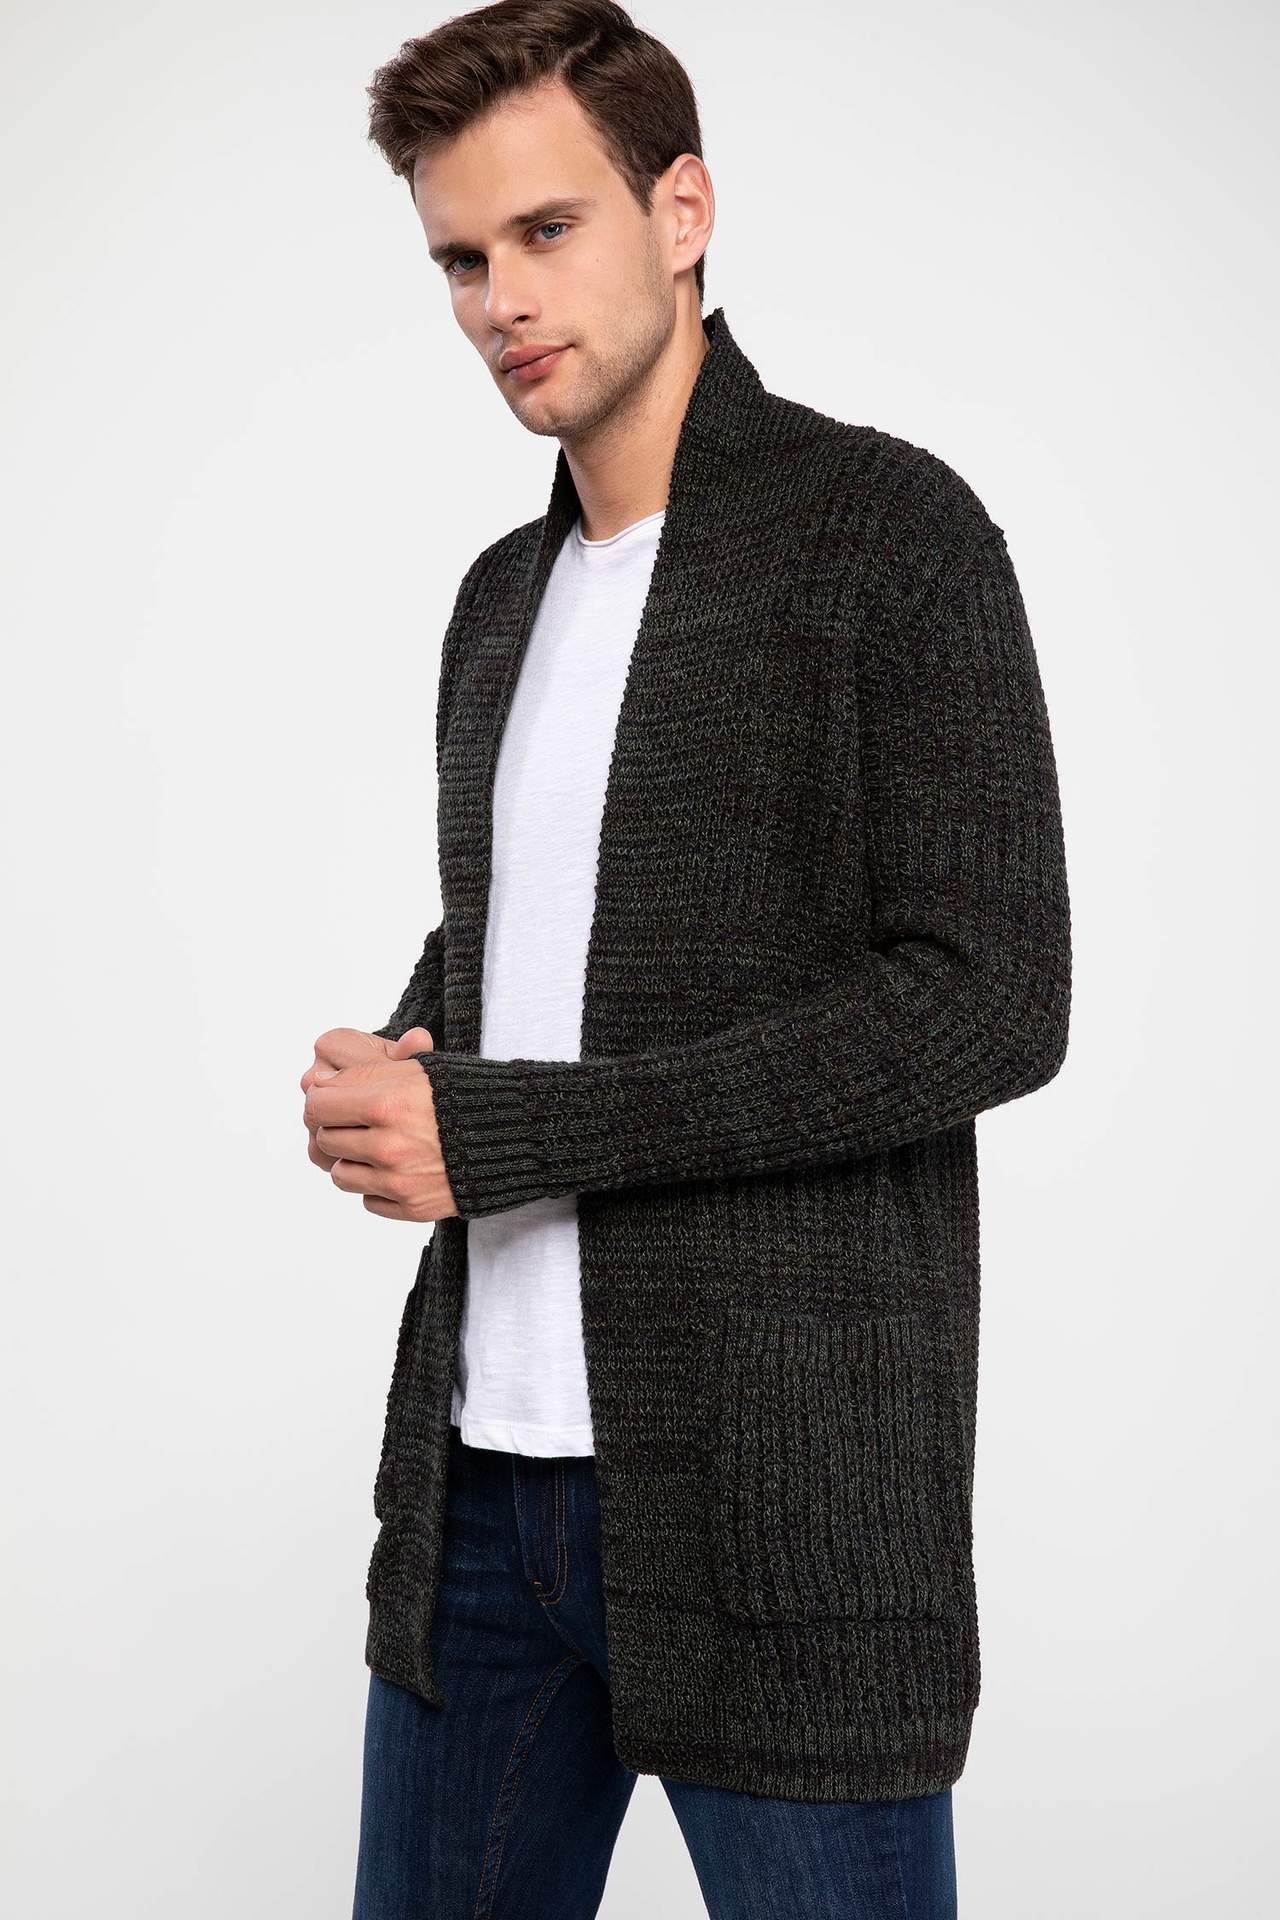 DeFacto Fashion Lapel Man Knitted Cardigan For Men's Long Sleeves Casual Warm Jackets Male Coats Autumn New - J3111AZ18AU